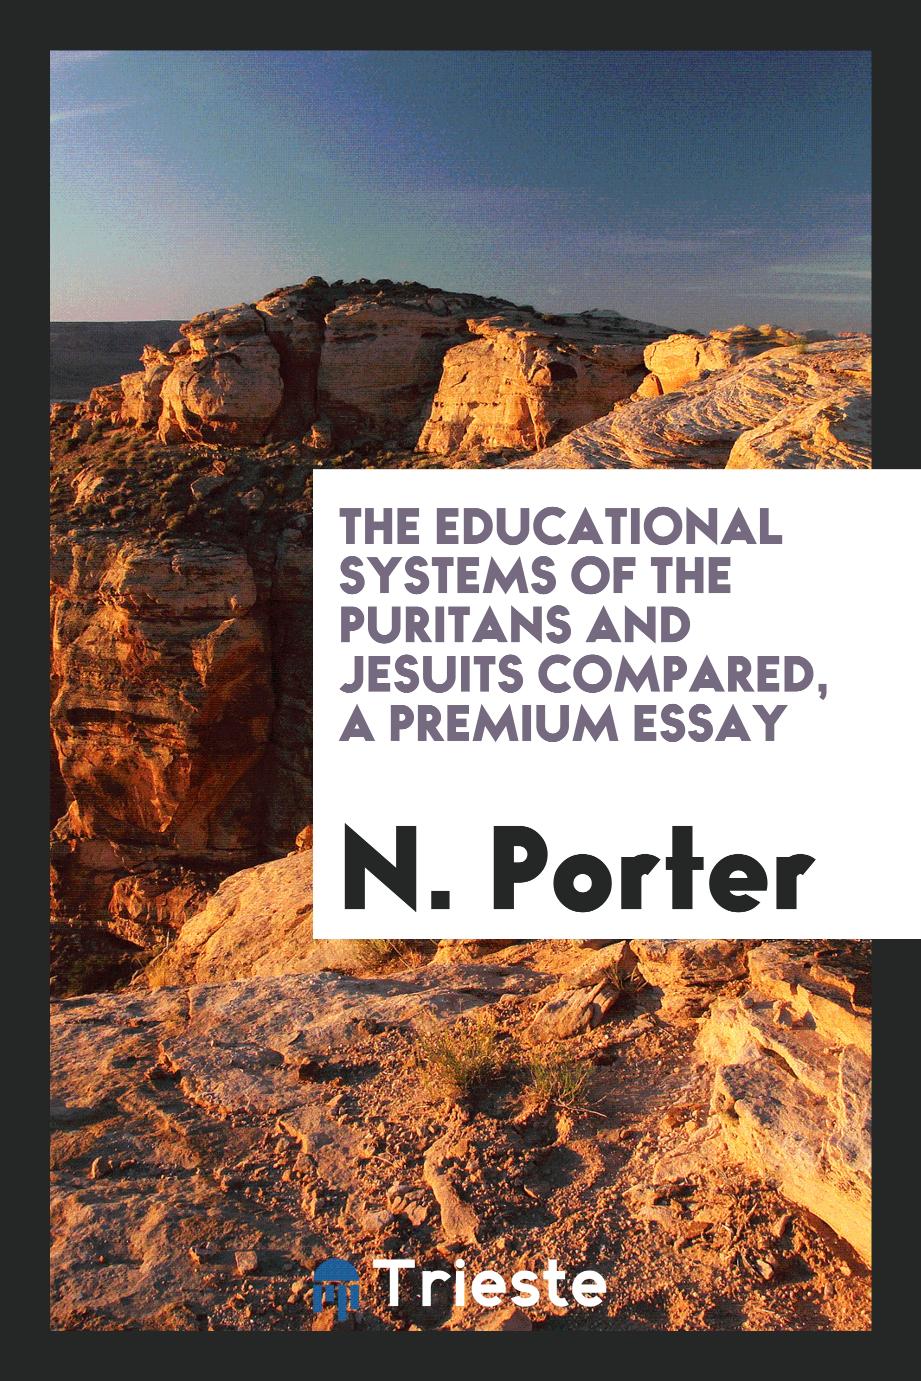 The Educational Systems of the Puritans and Jesuits Compared, a Premium Essay